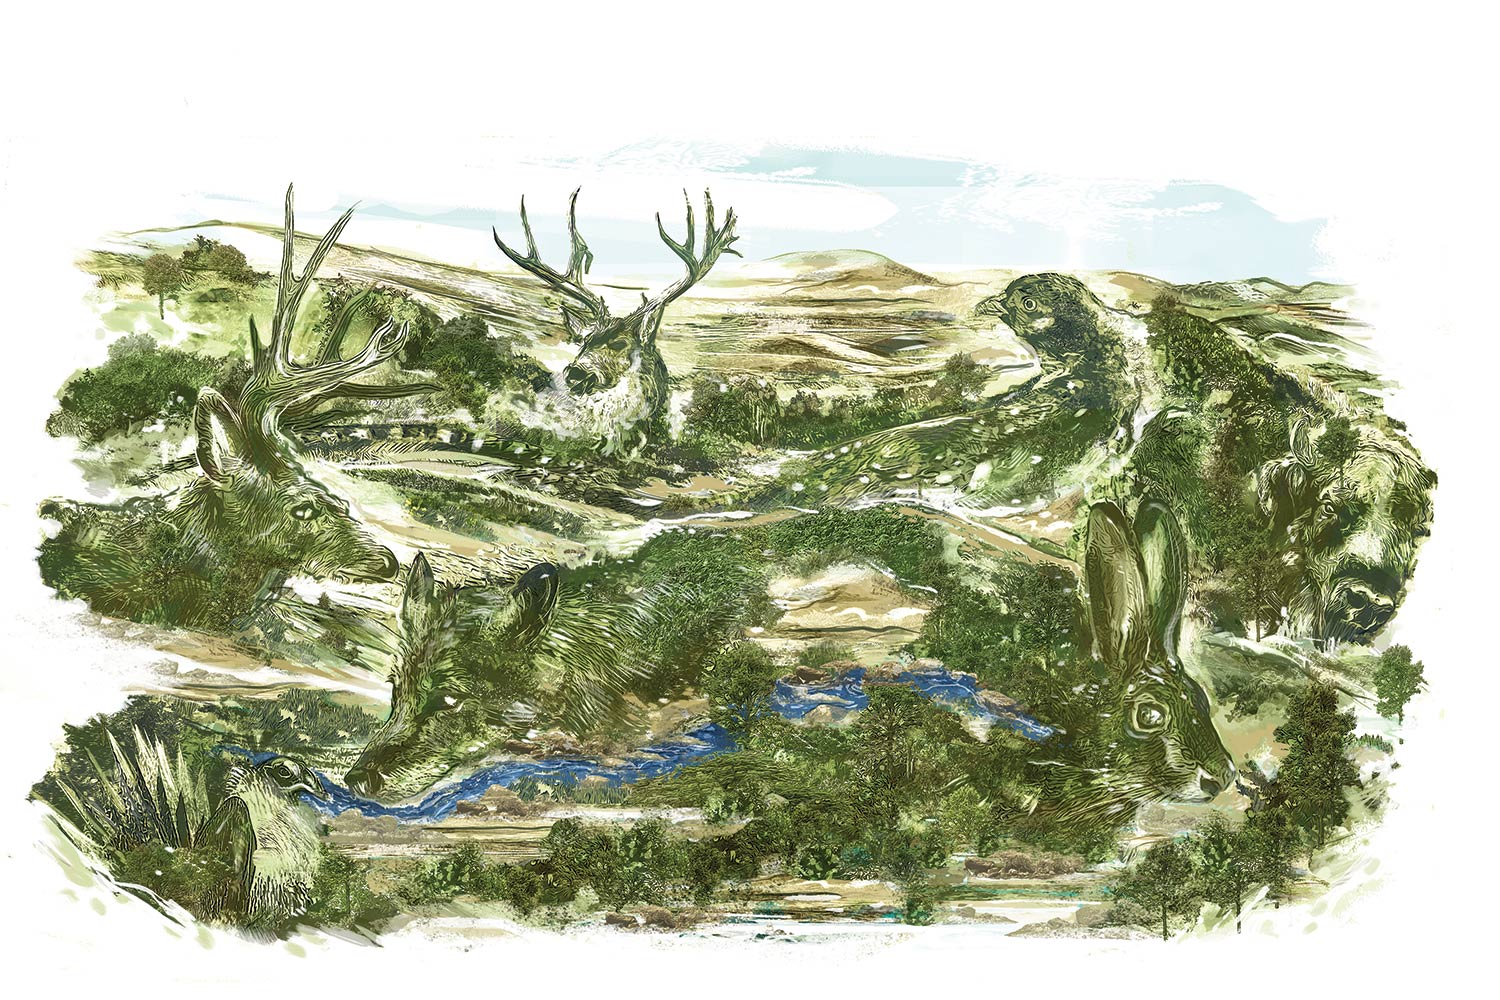 Illustration of a landscape painted in the shape of animals.